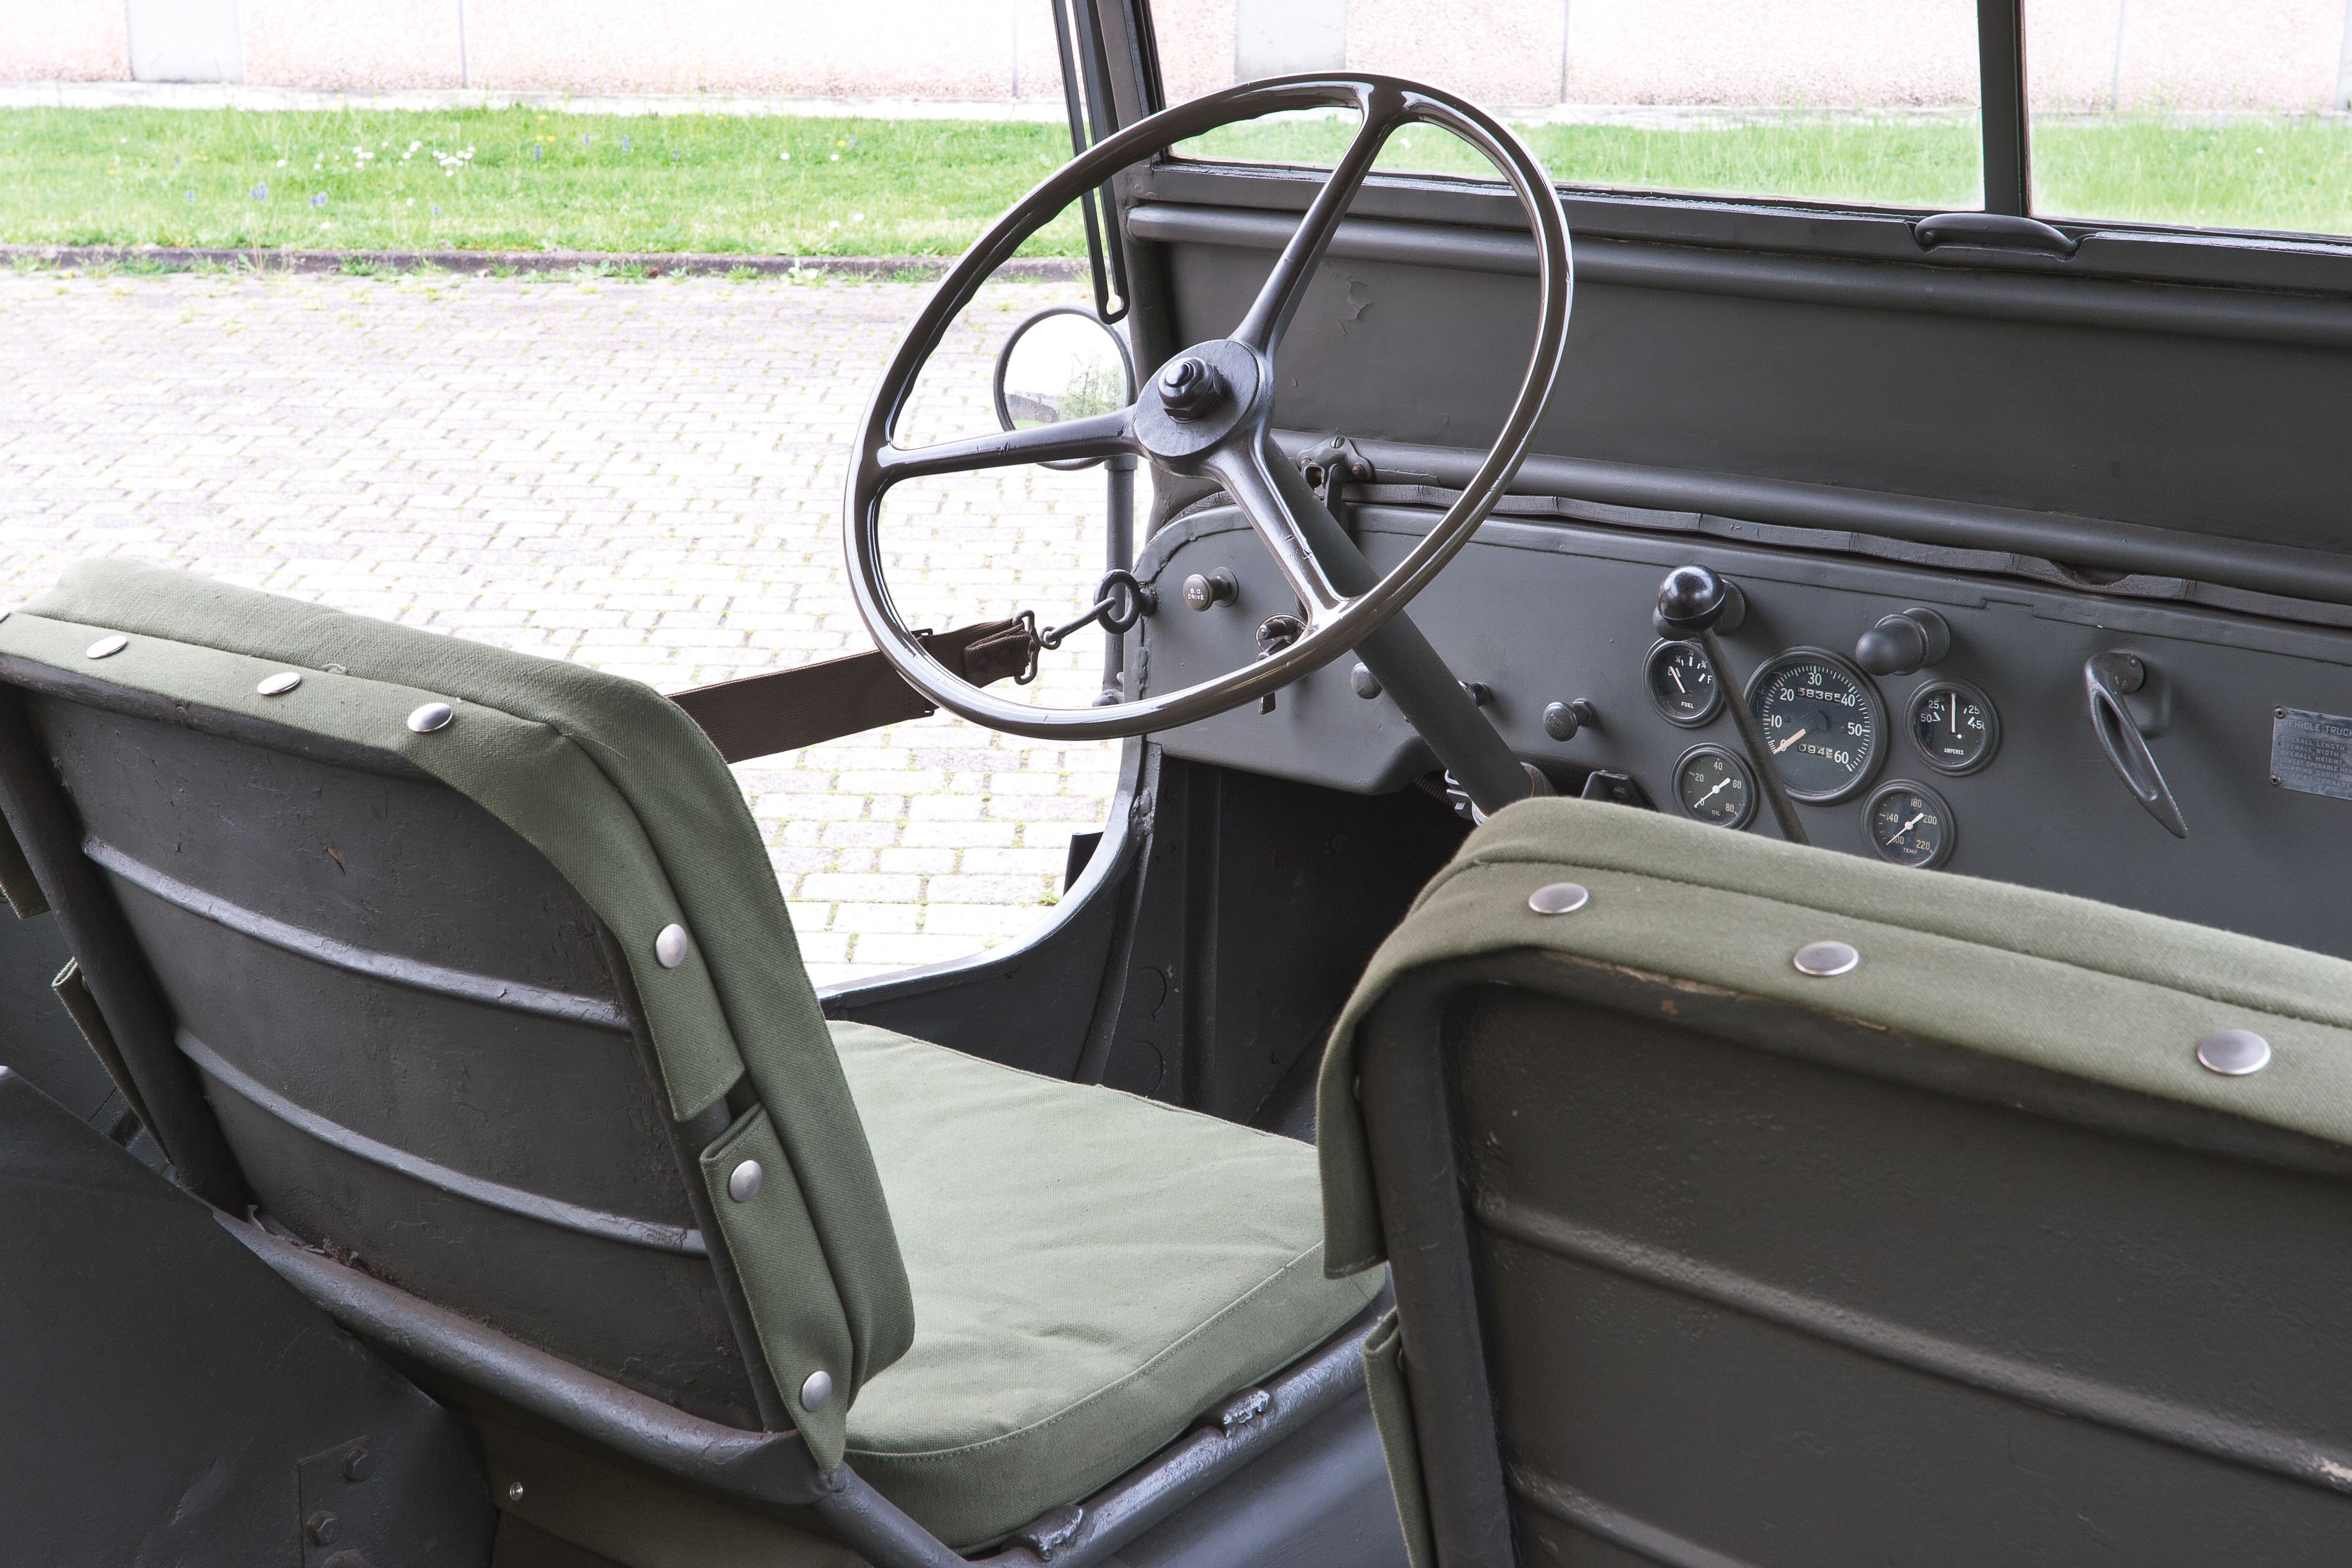 1943 willys-overland mb (jeep) 1/4 ton